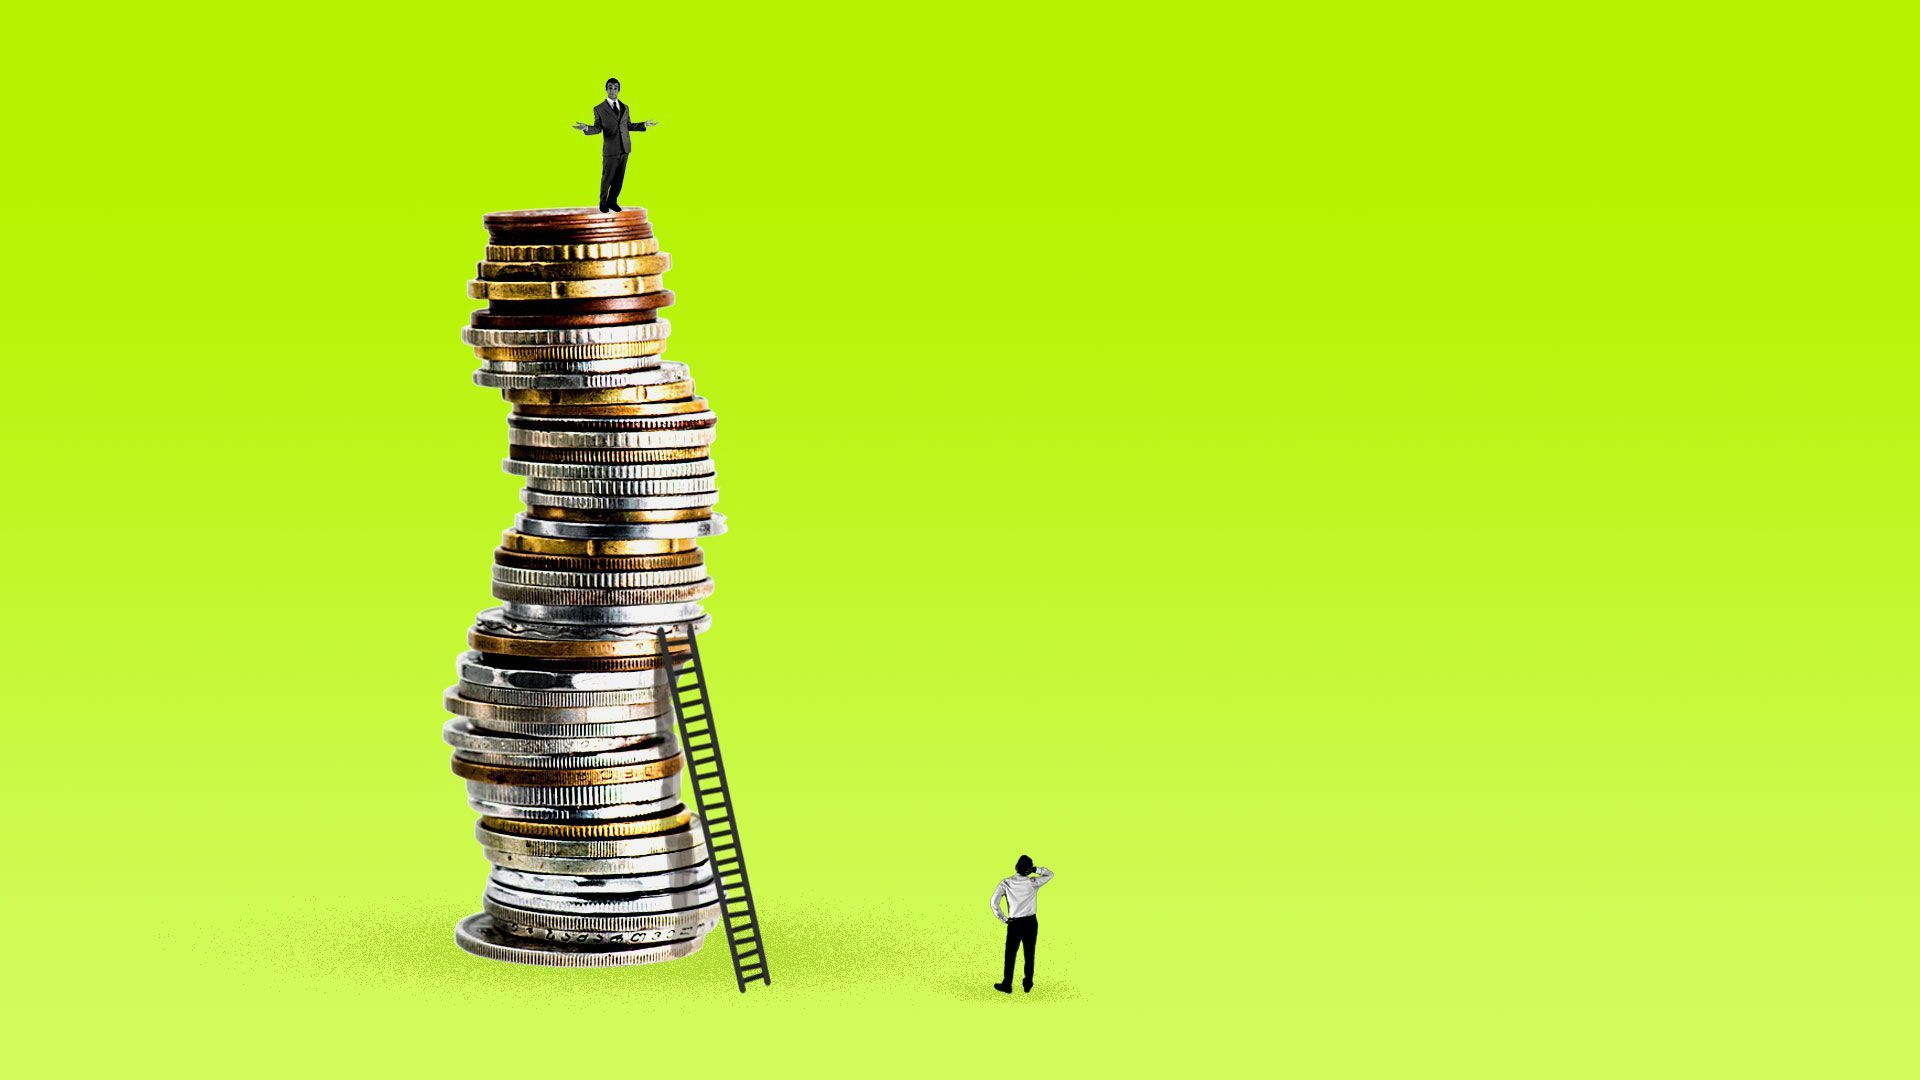 illustration of man climbing stack of coins